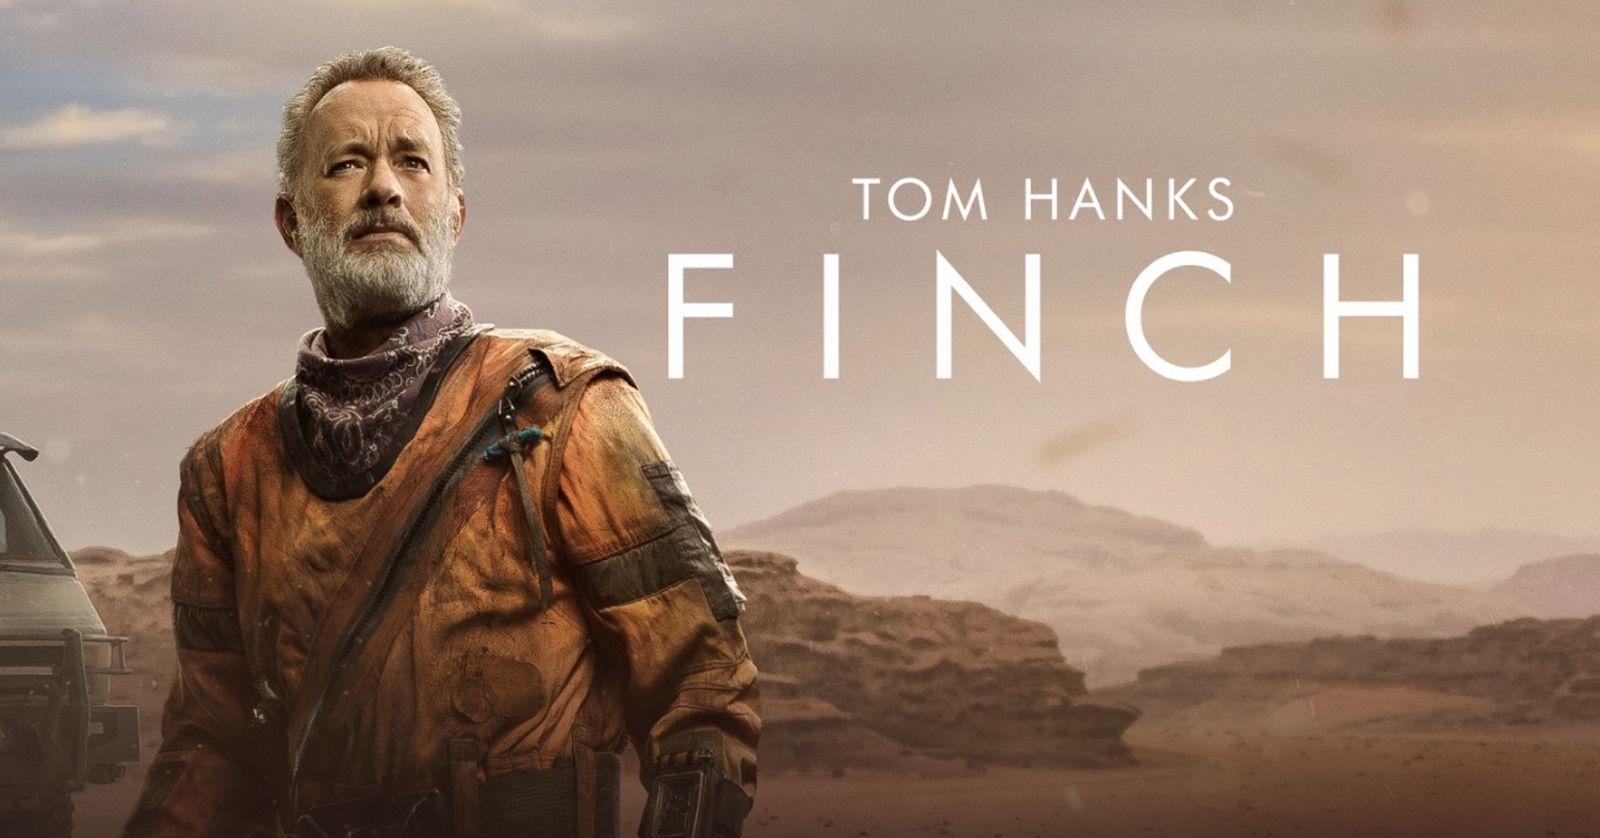 Apple TV+ Movie 'Finch' Sets New Opening Weekend Record